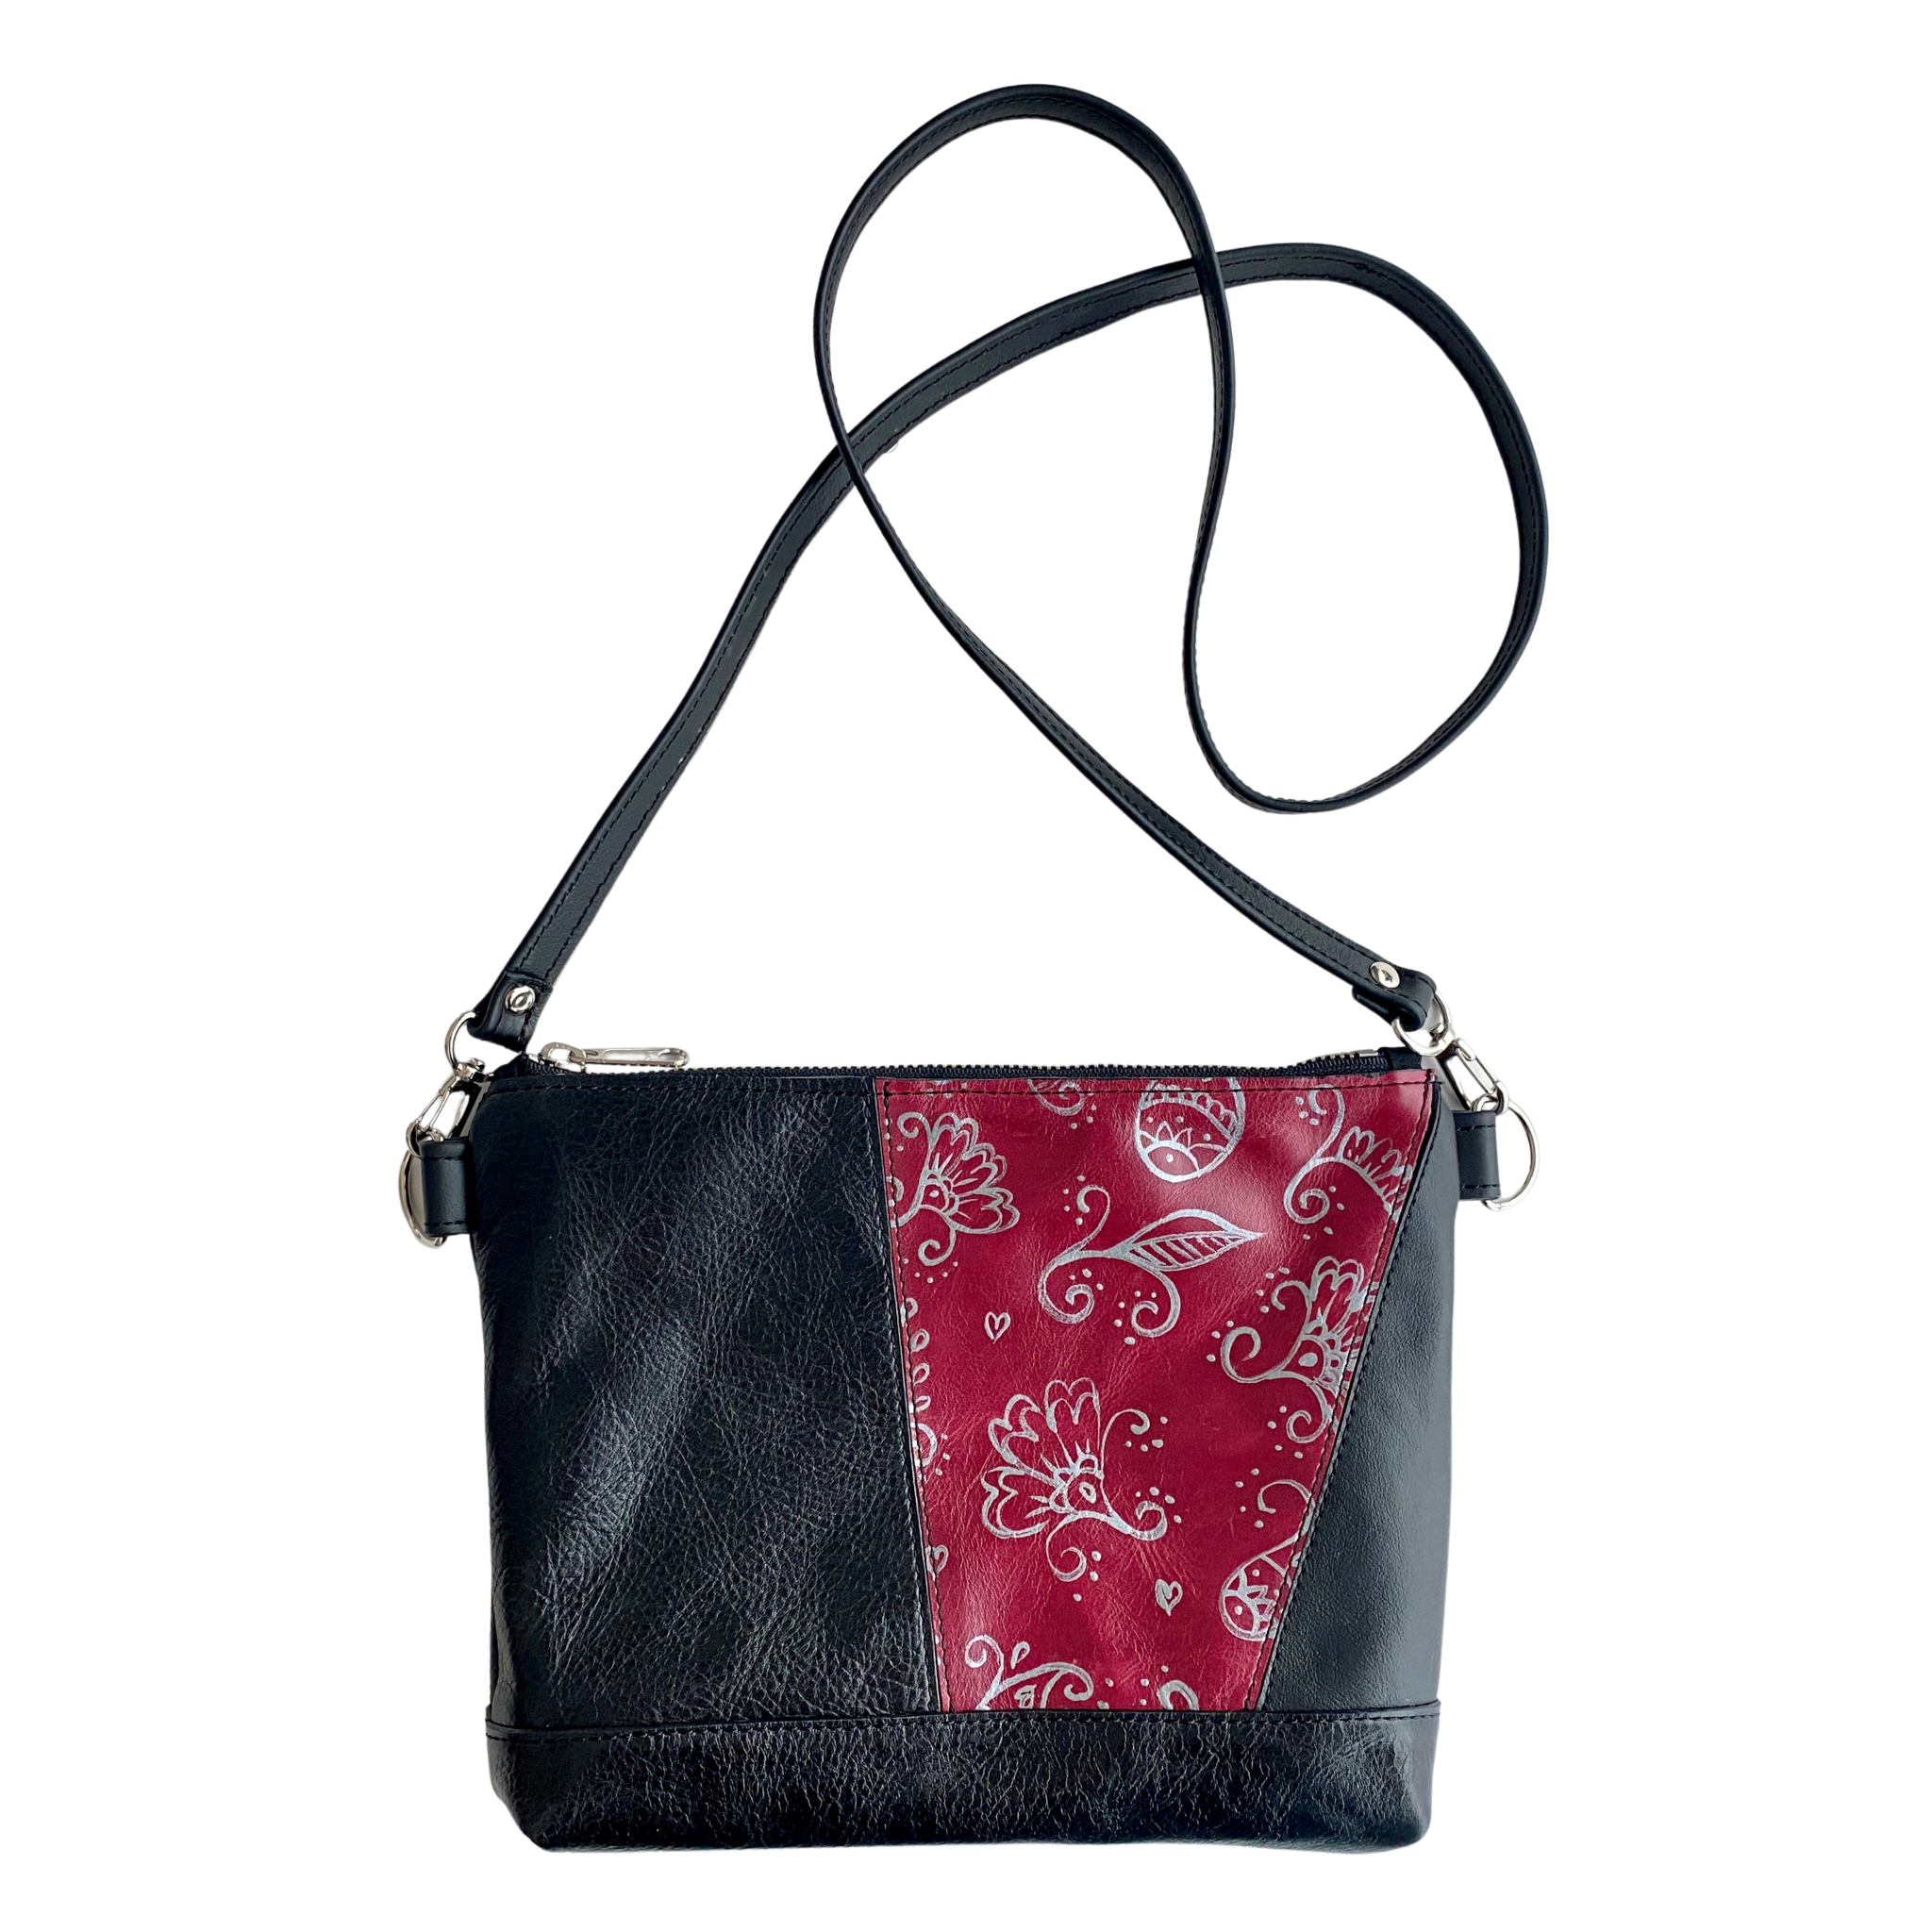 Crossbody Clutch in Sangria, Onyx, Handpainted Floral, RTS